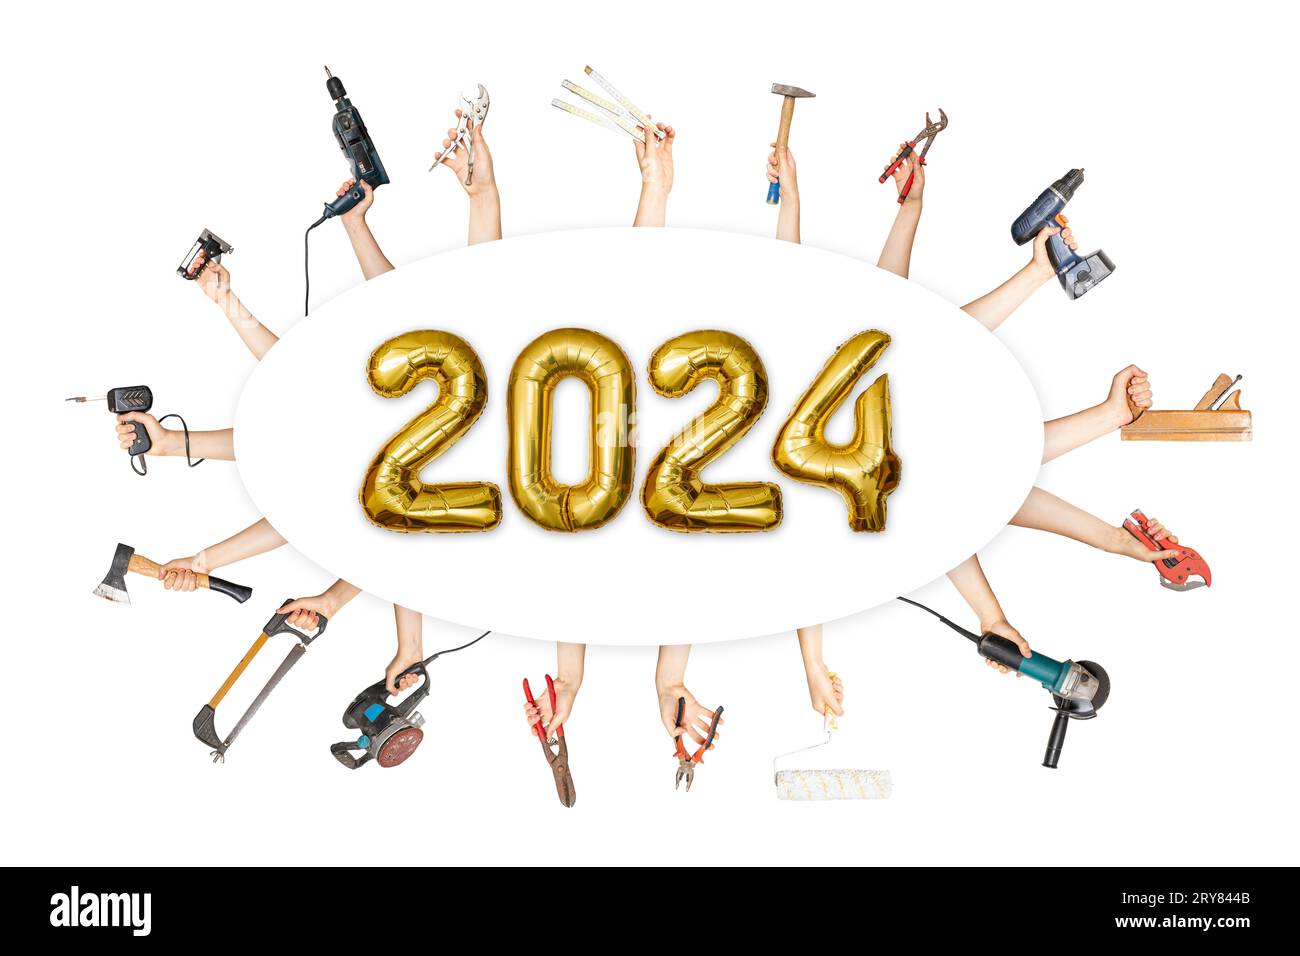 Hands holding multiple tools surrounding 2024 new year number made from golden balloons, hardware store holiday sign Stock Photo